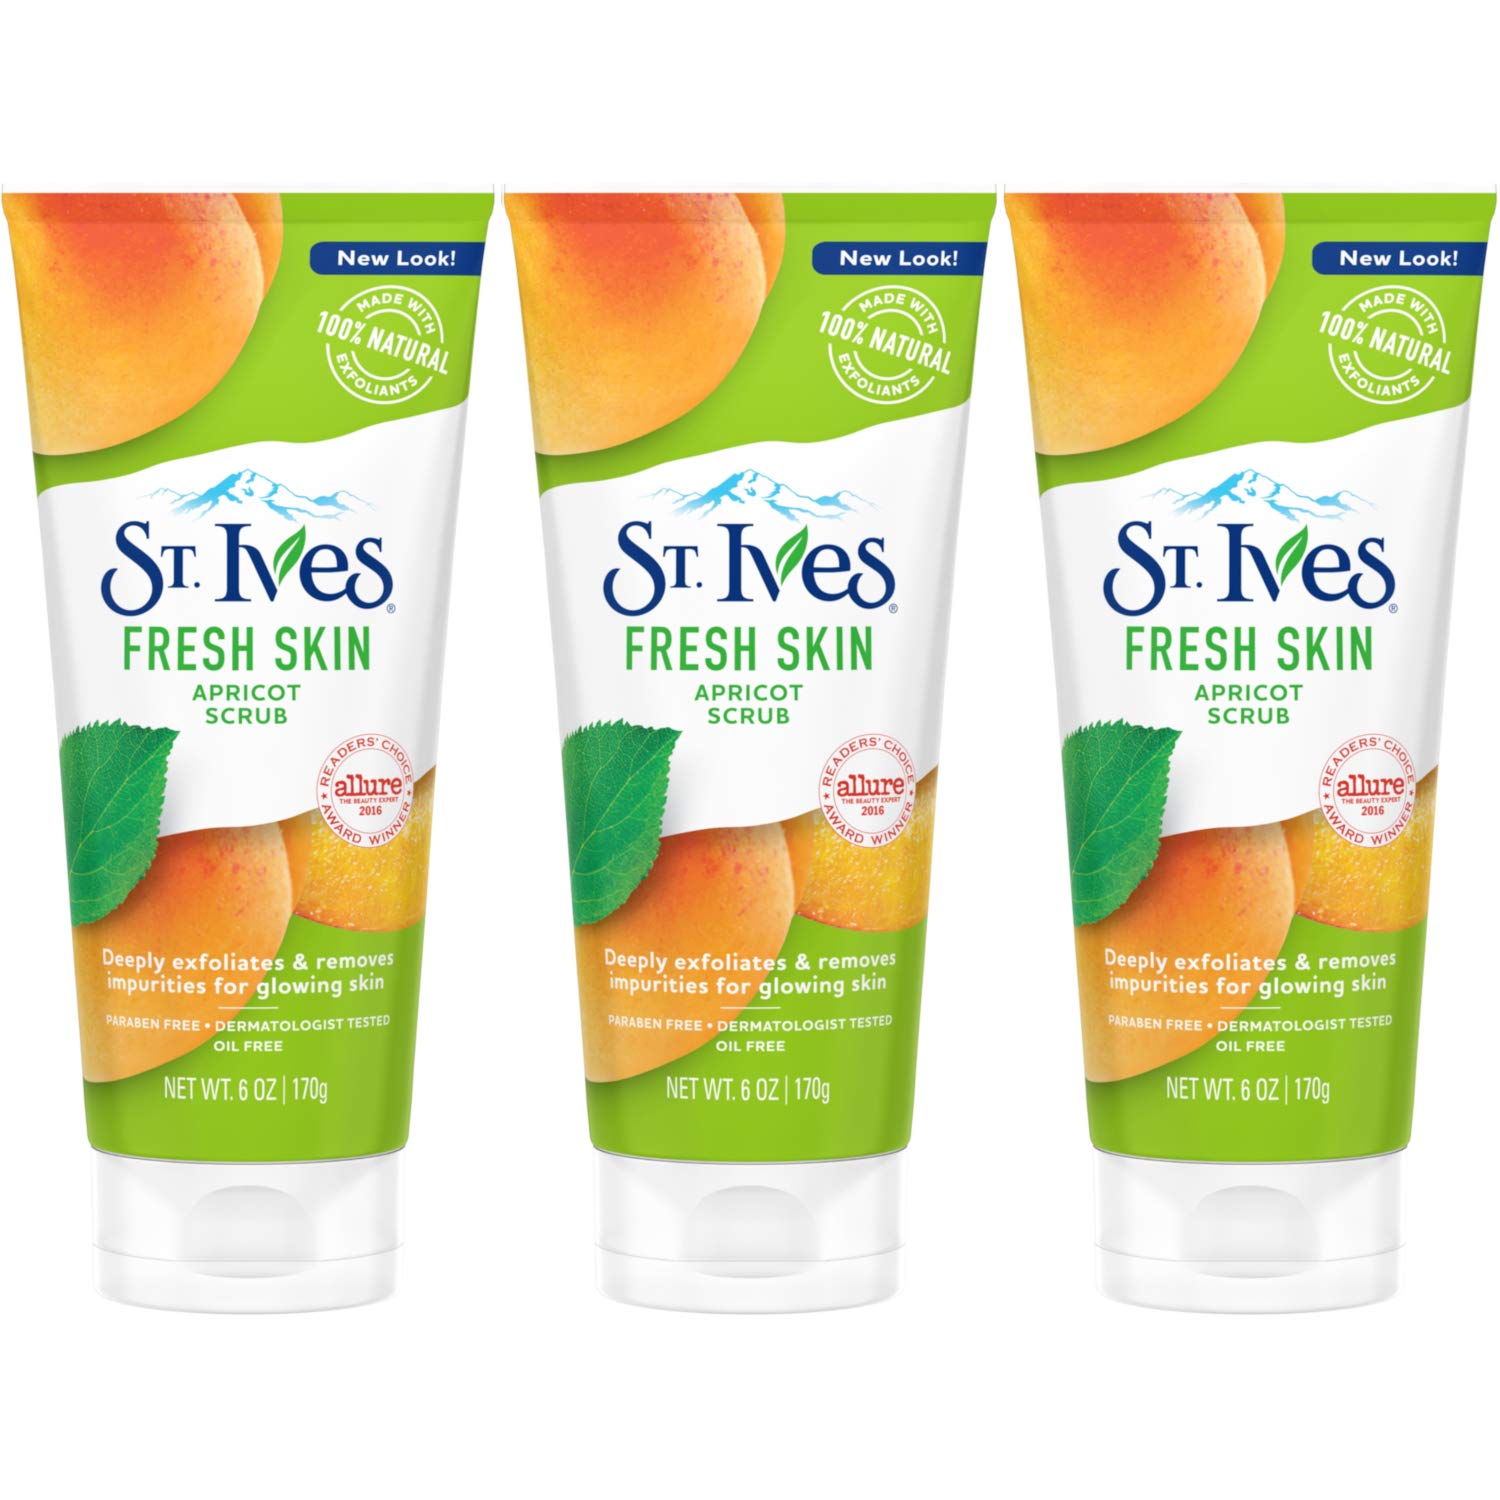 St. Ives Face Scrub Apricot 6 oz (Pack of 3)